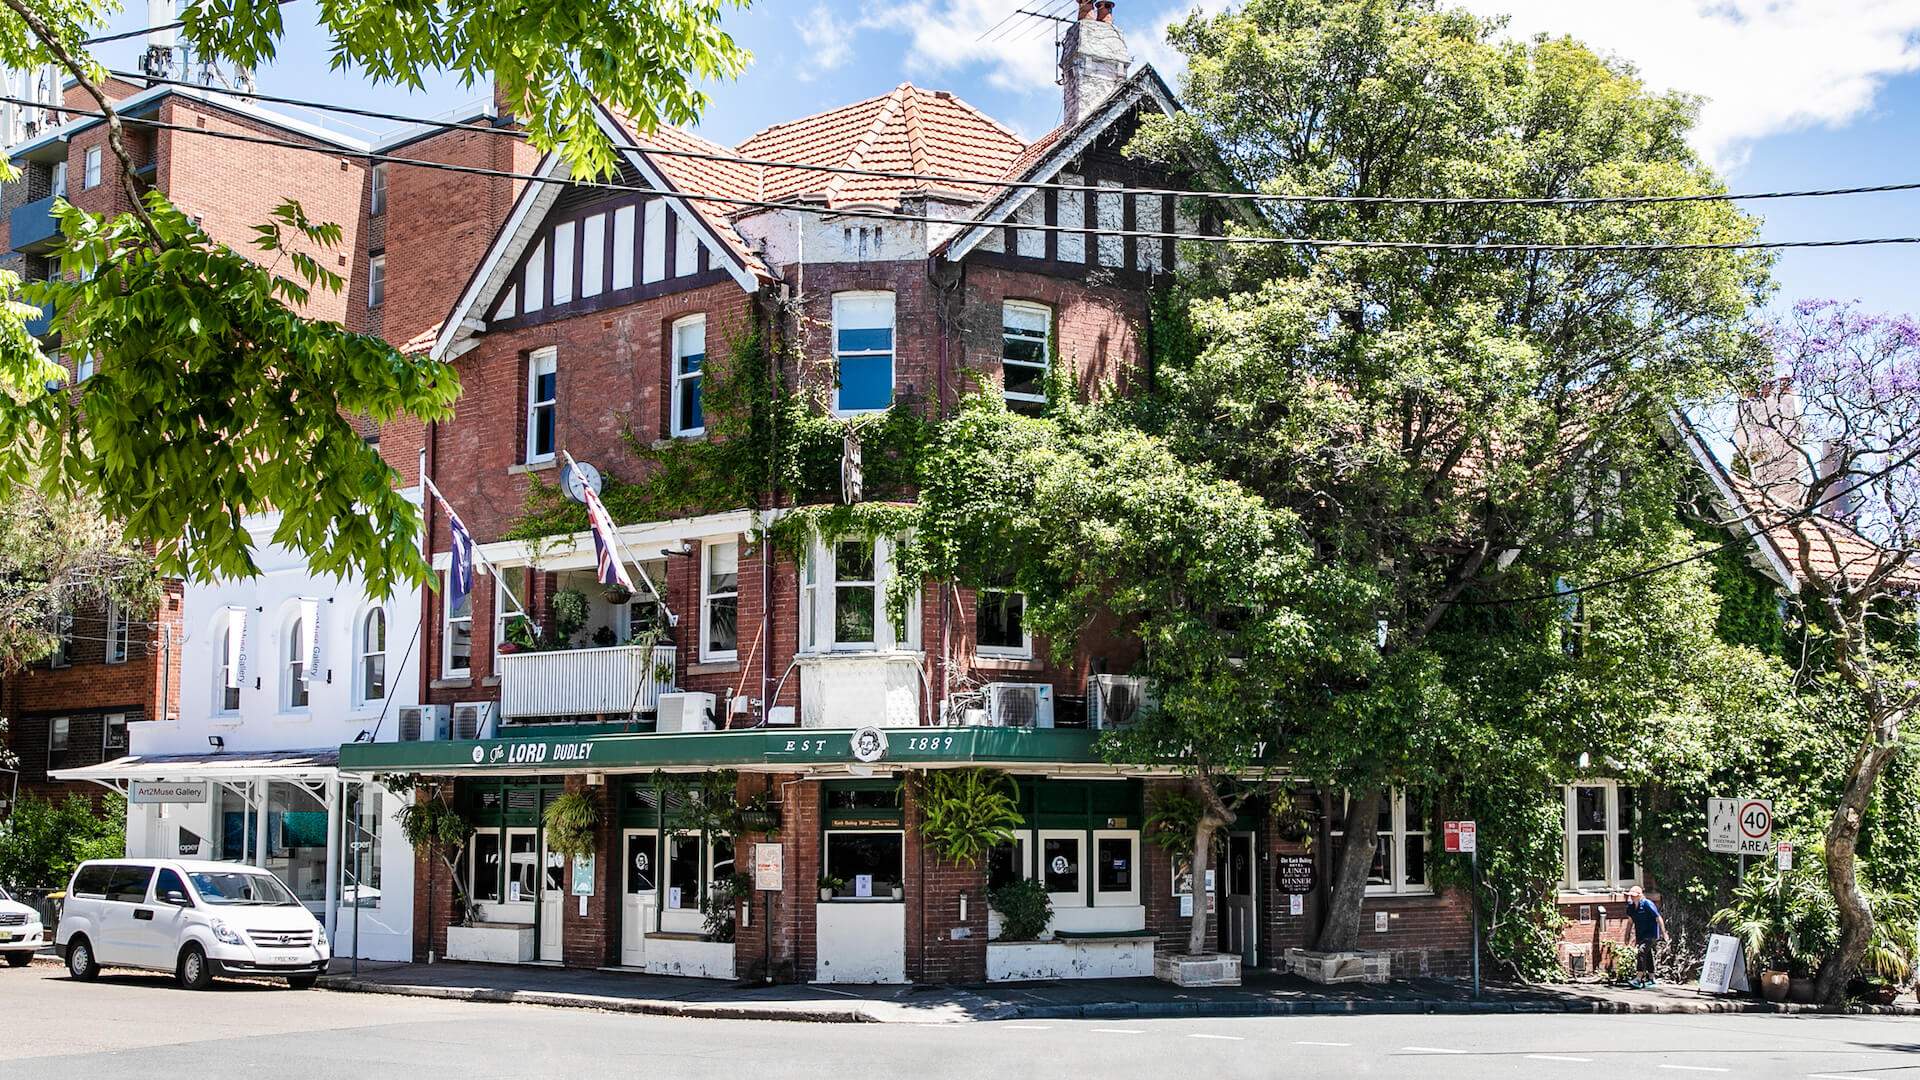 The outside of The Lord Dudley - one of the best pubs in Sydney.